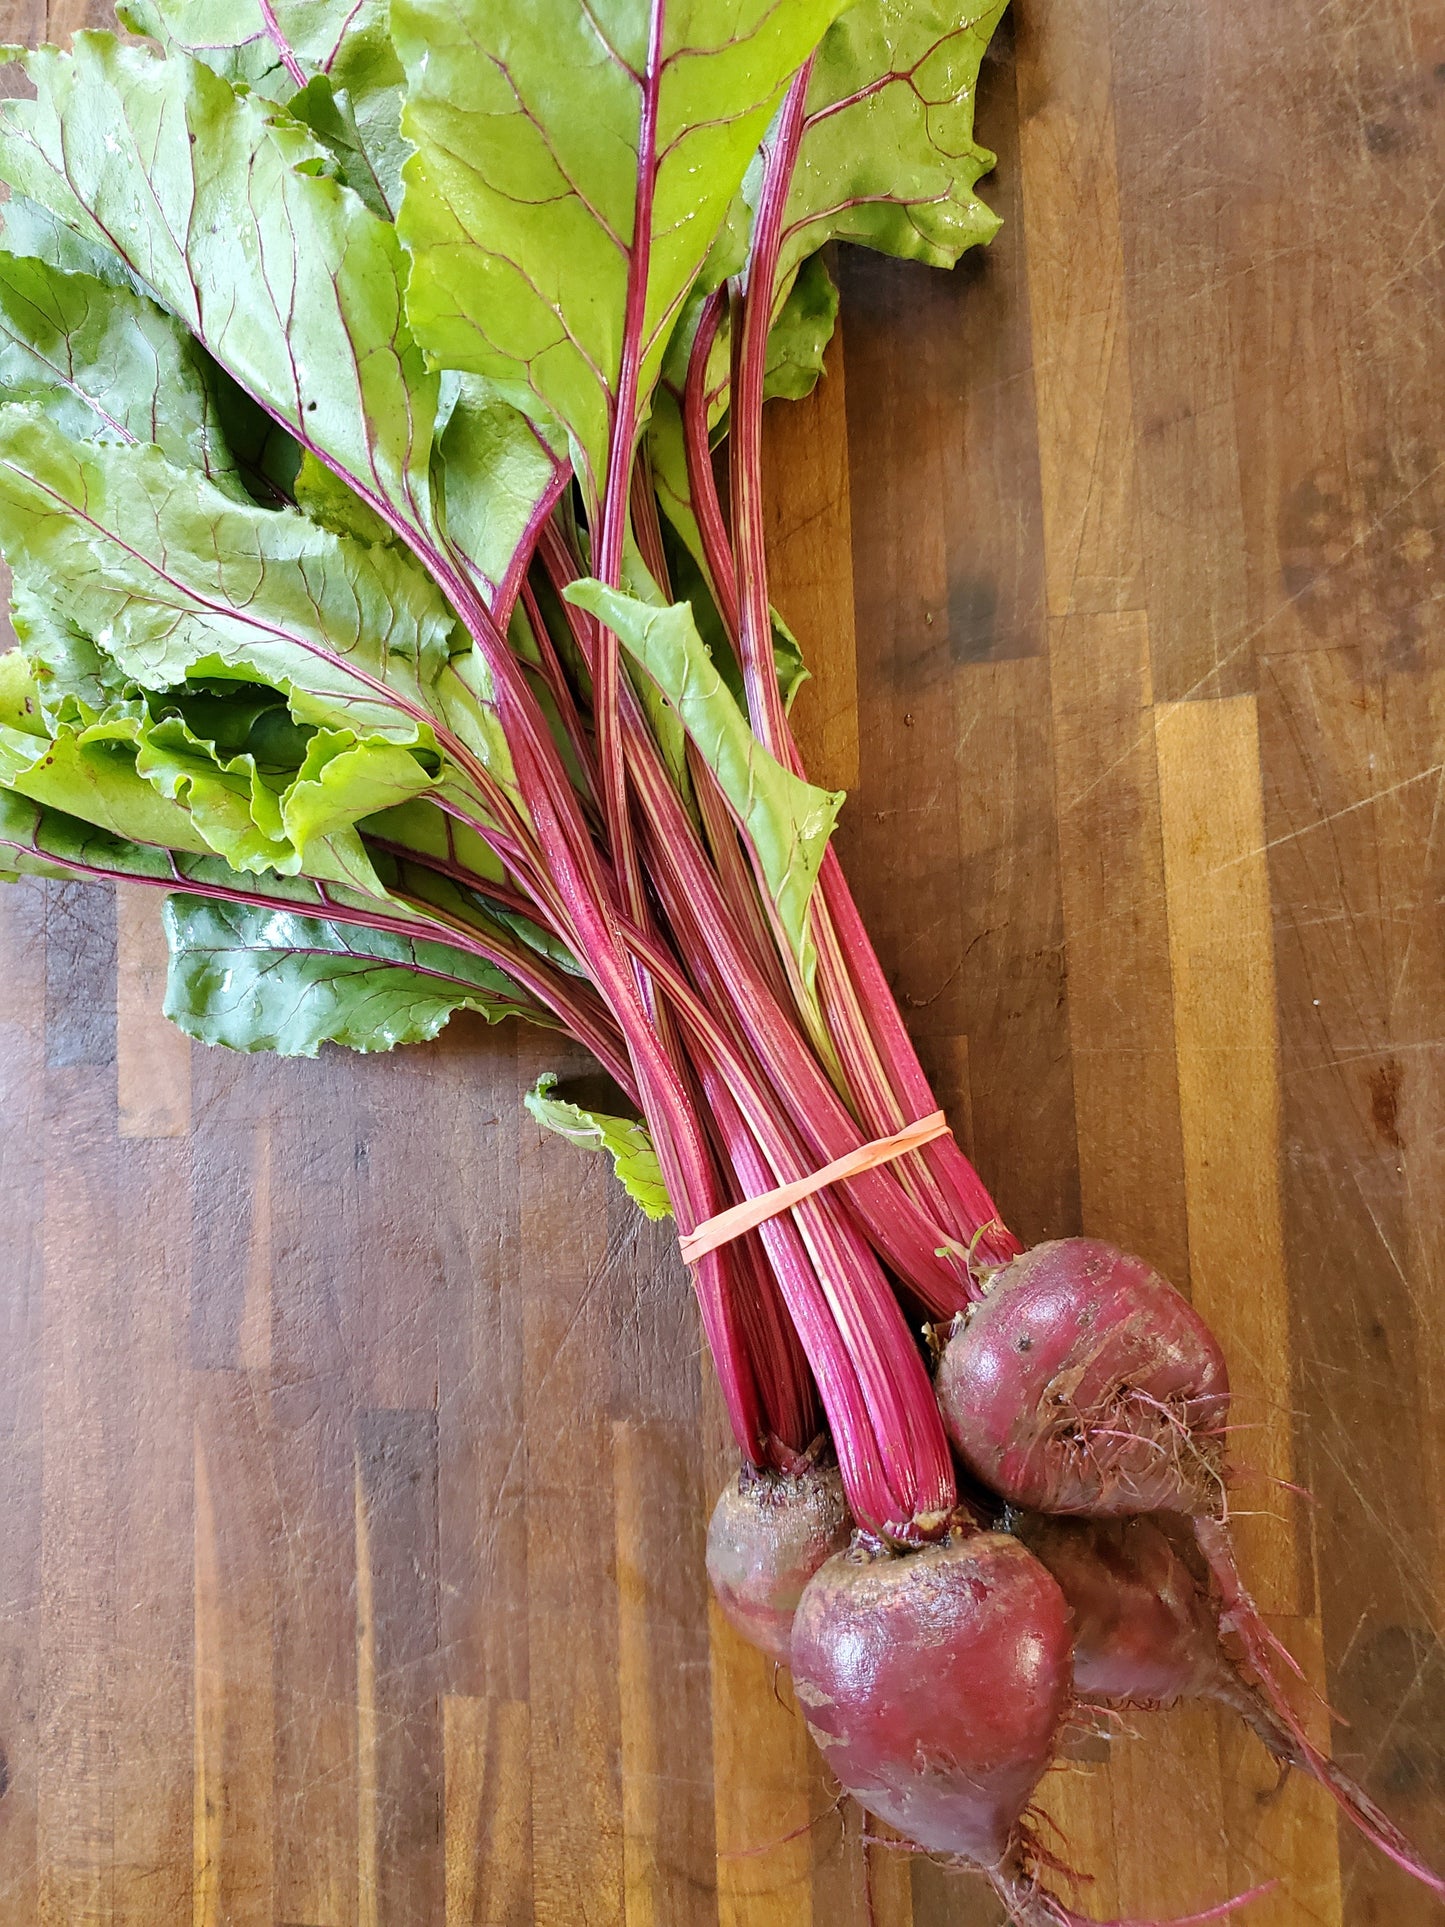 Beets (1.5lb Topped)